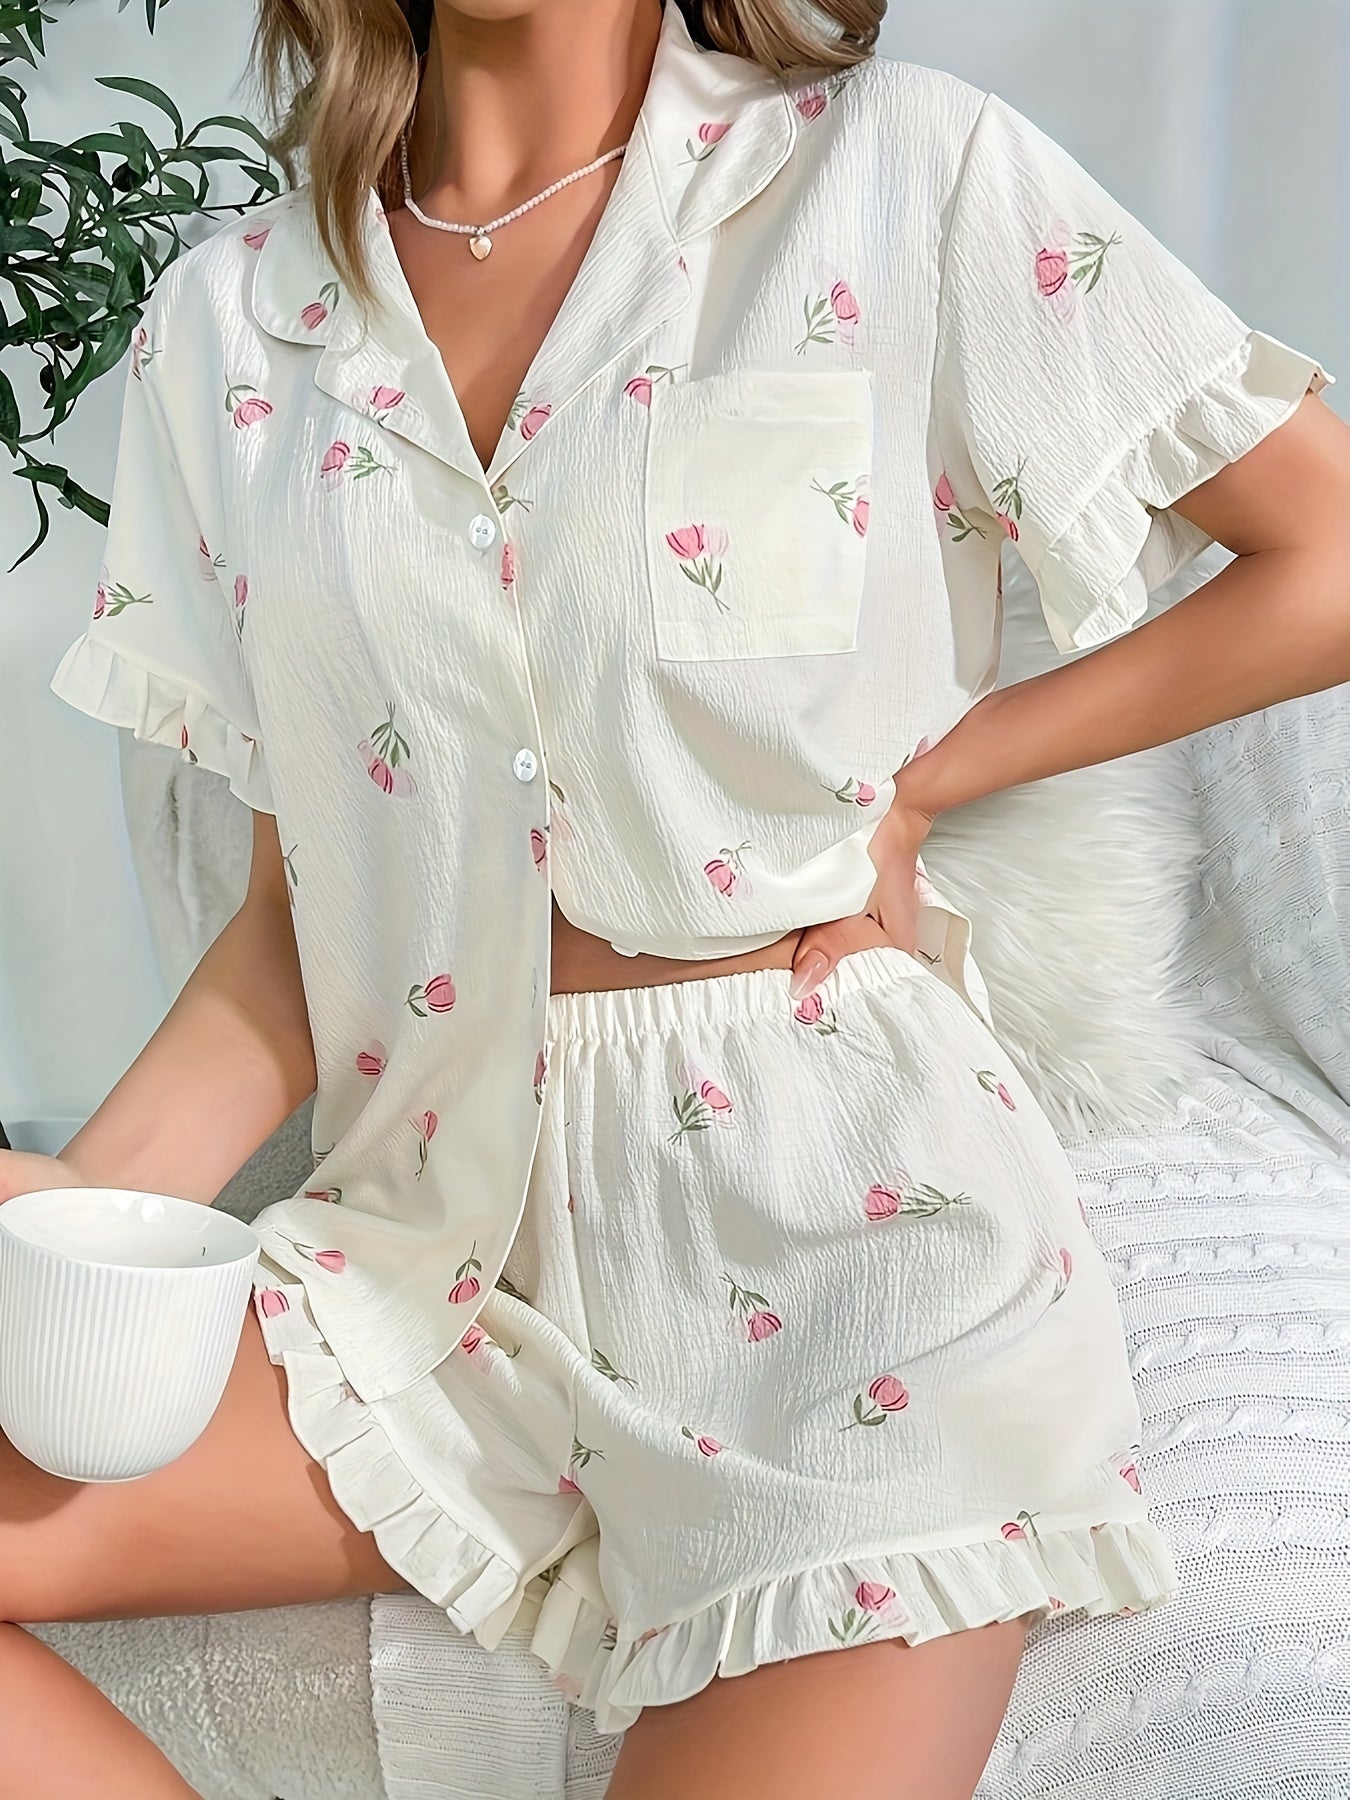 Summer Floral Print Pajama Set - Soft Fabric with Ruffle Hem, Short Sleeve Button-Down Lapel Top & Stretchy Elastic Shorts